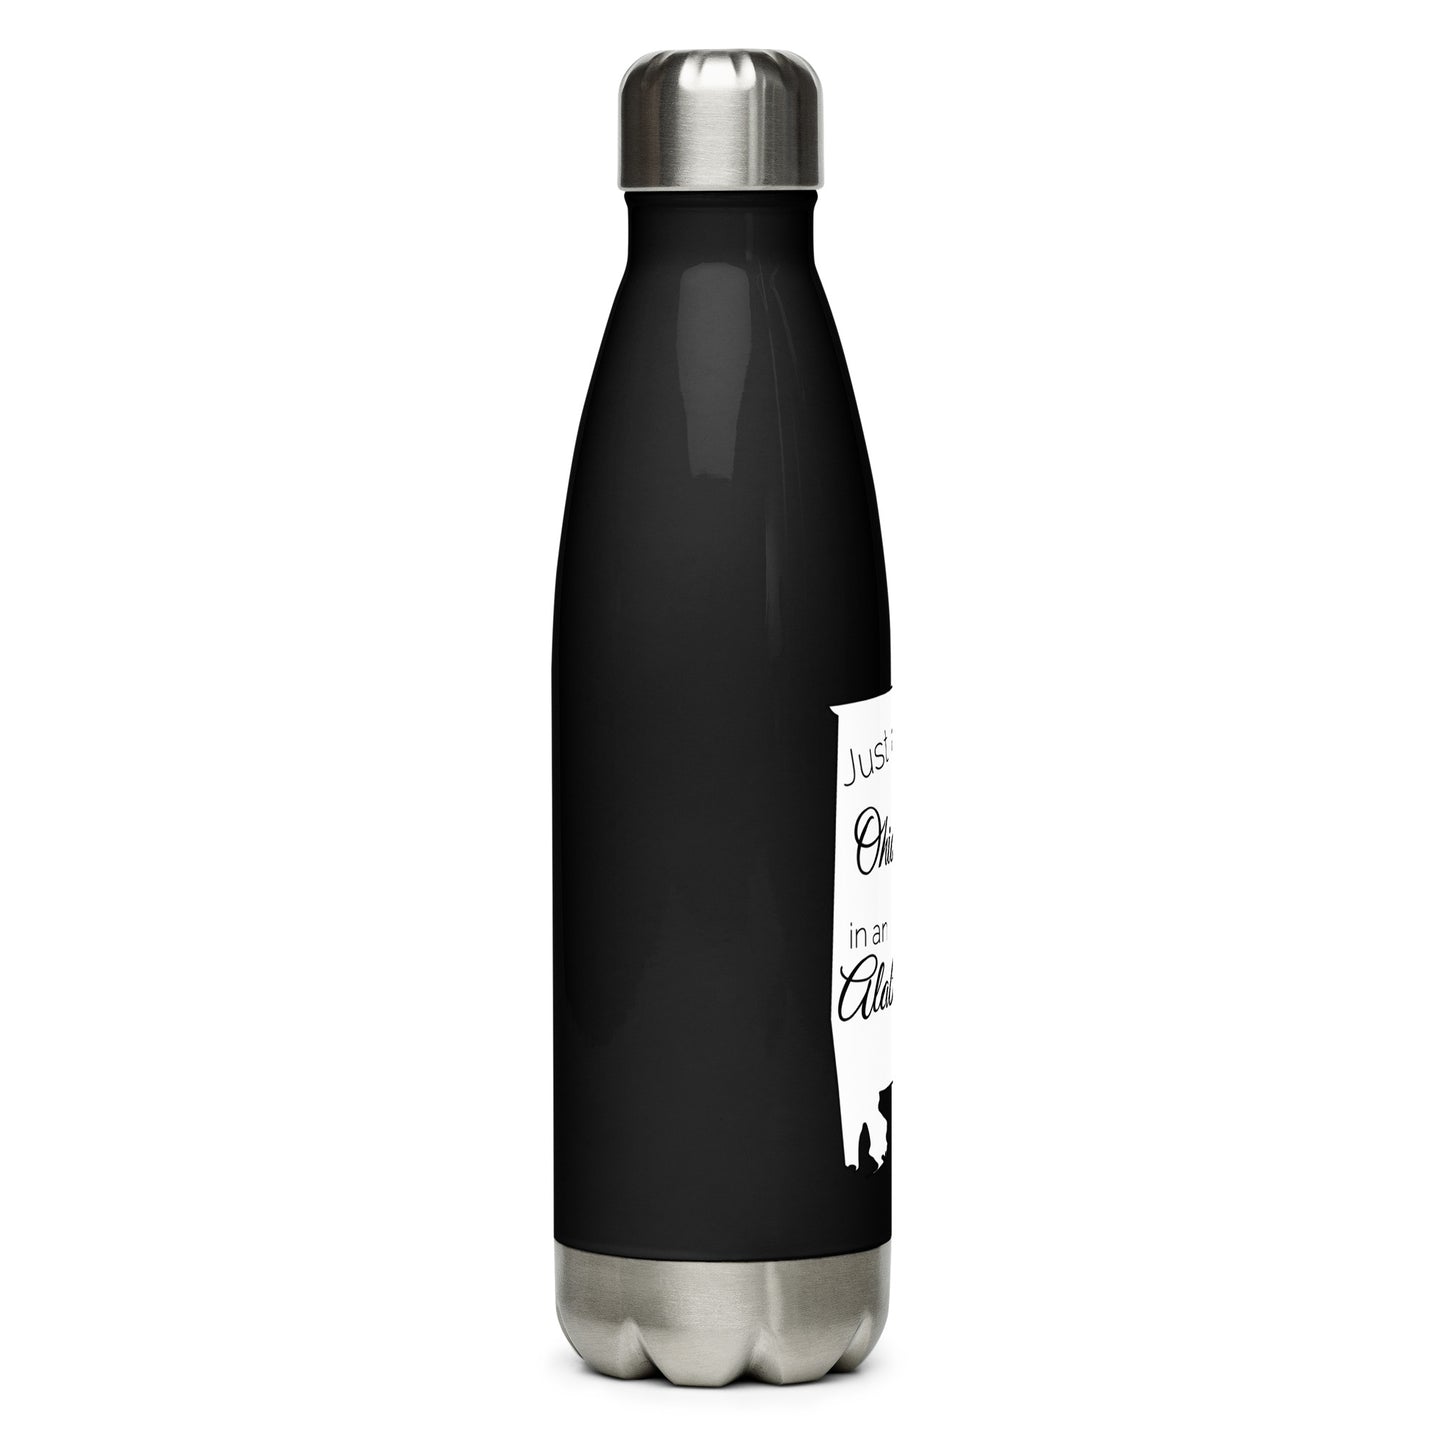 Just an Ohio Girl in an Alabama World Stainless Steel Water Bottle